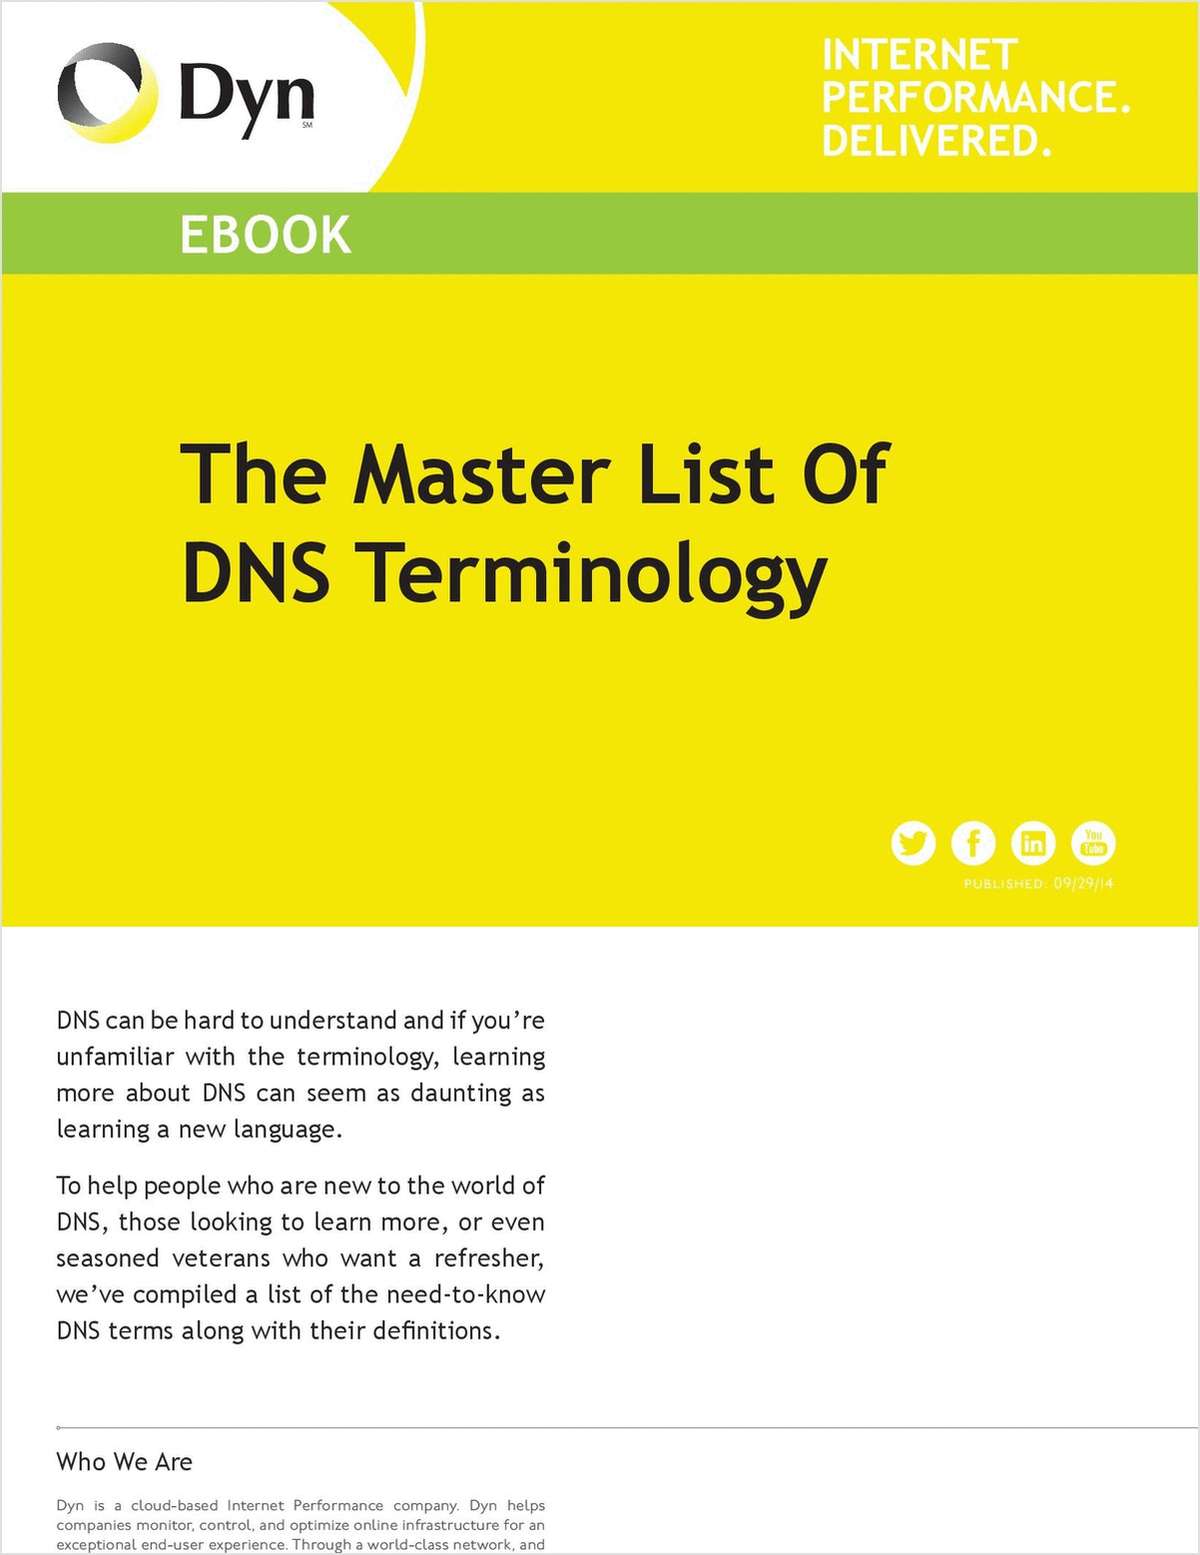 The Master List of DNS Terminology